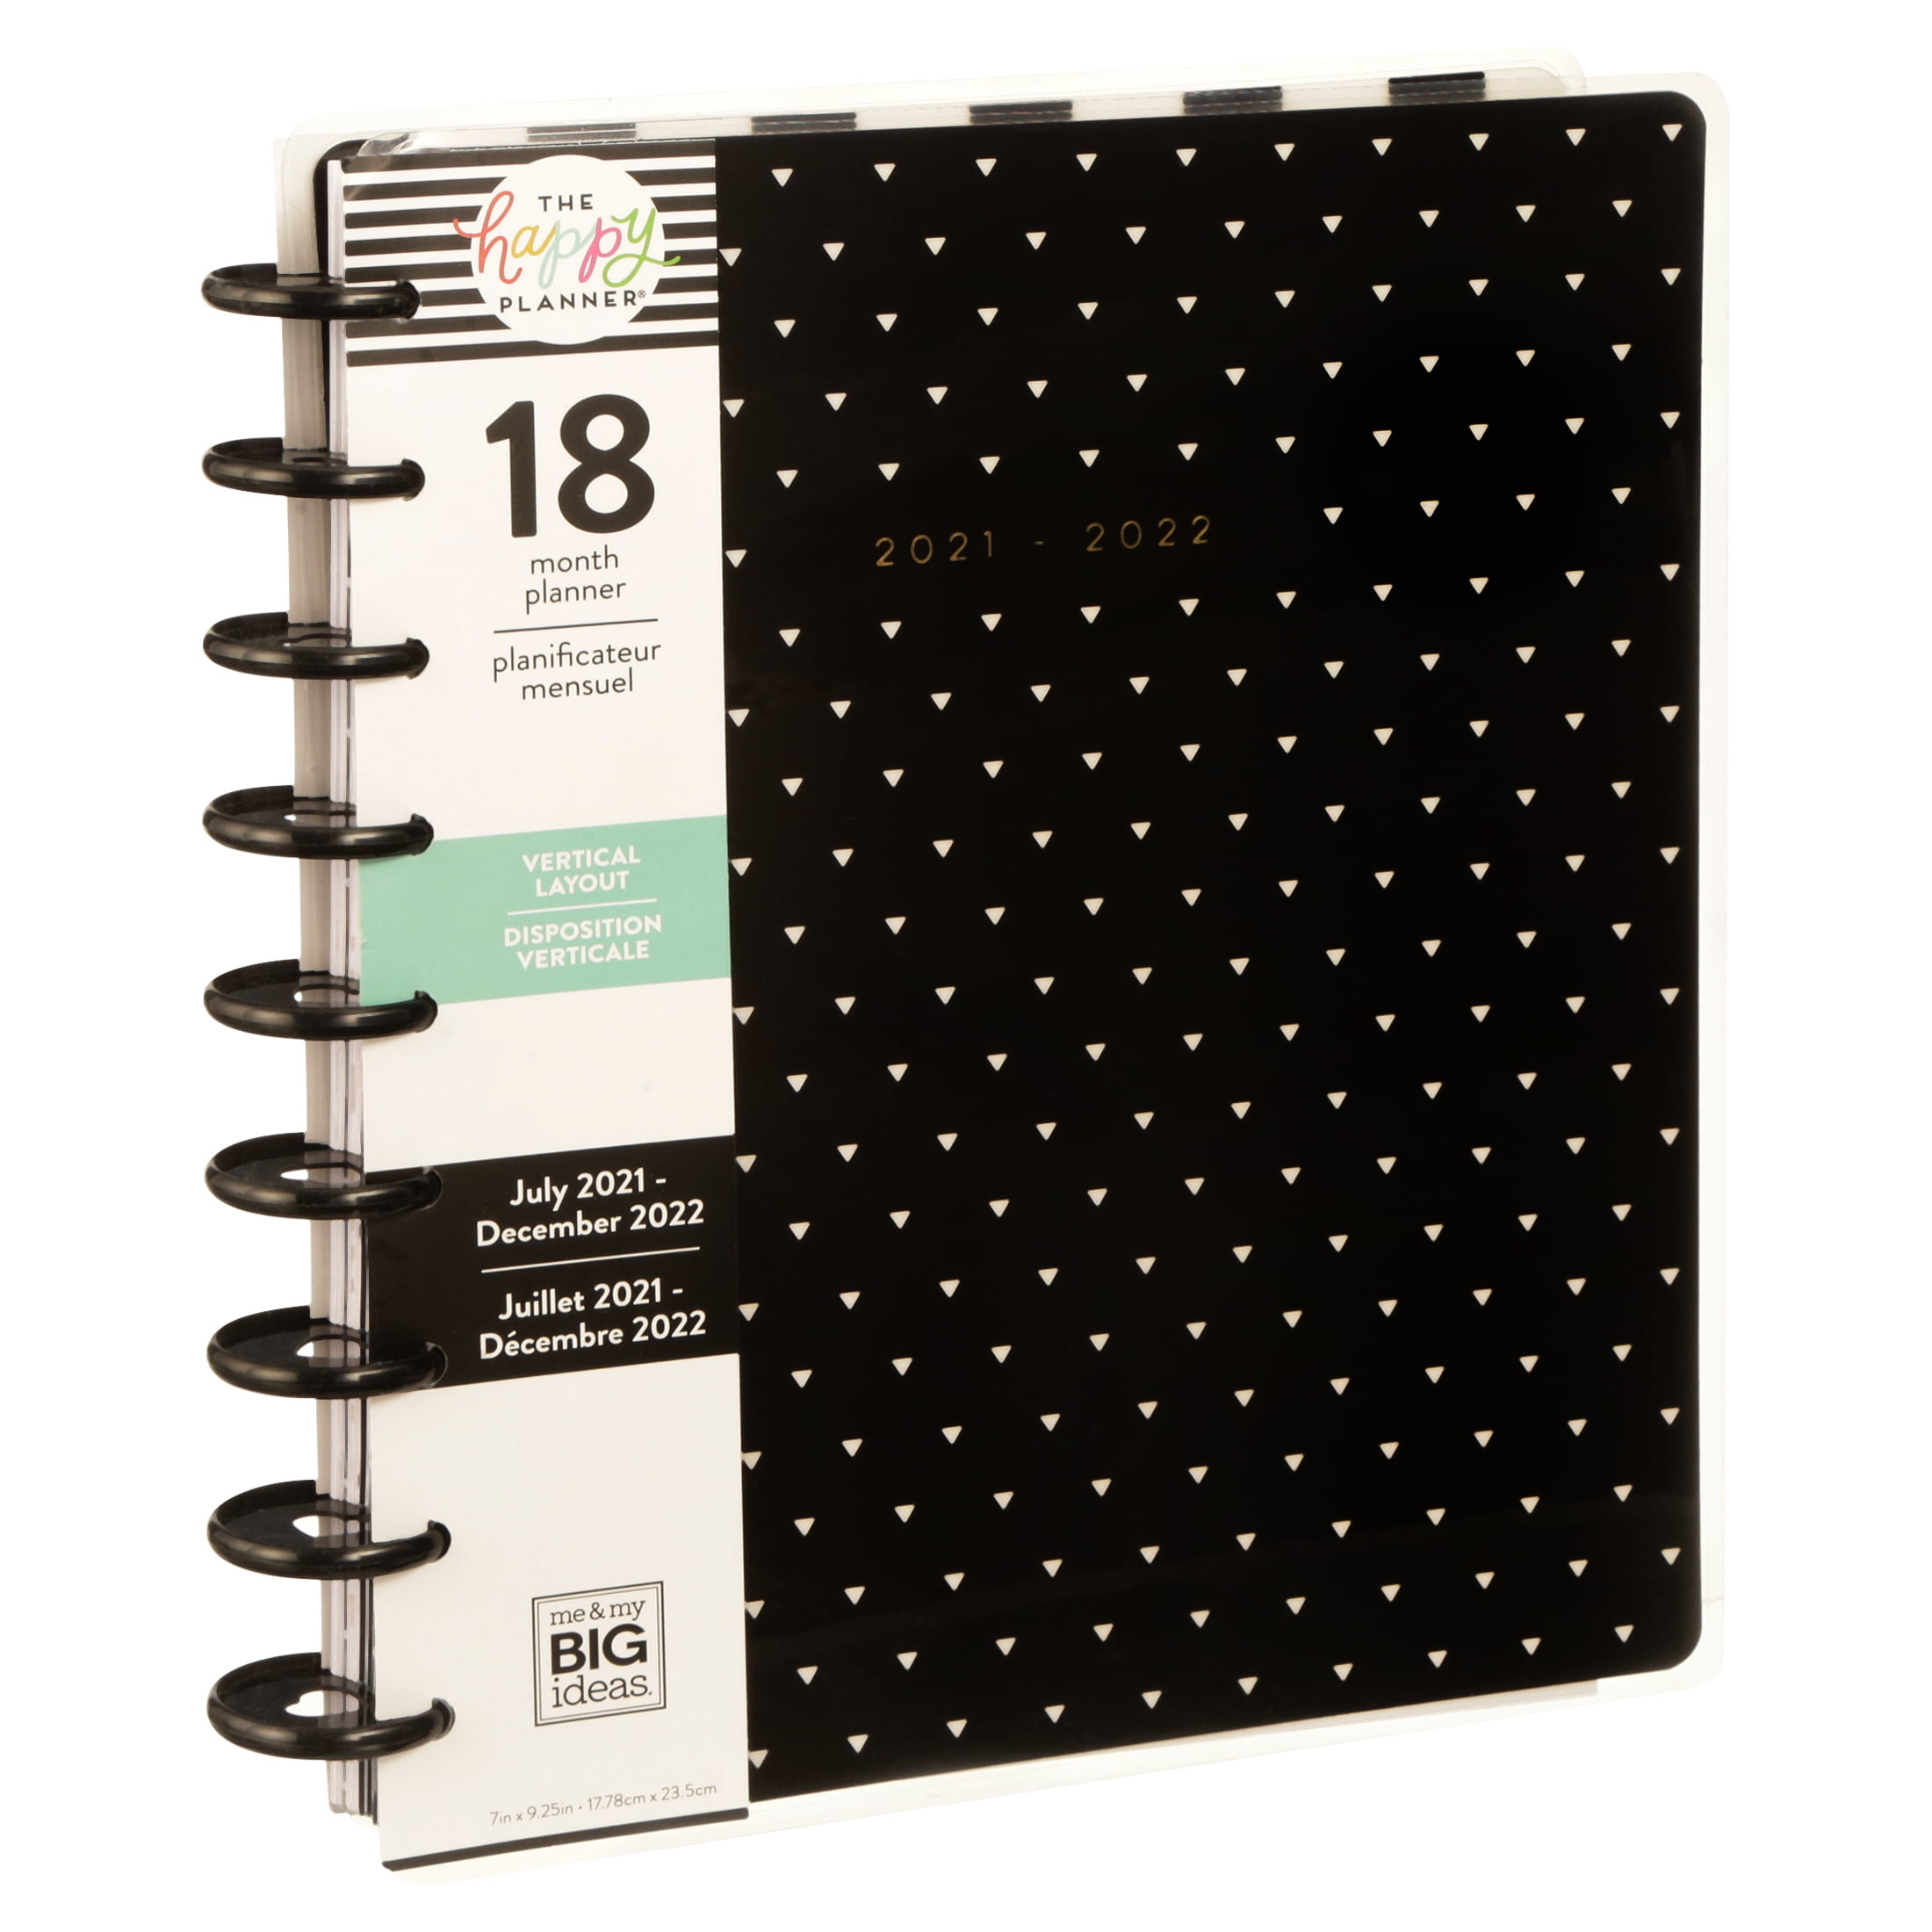 The Happy Planner Black and White Classic 18 Month Planner, July 2021 -  December 2022 